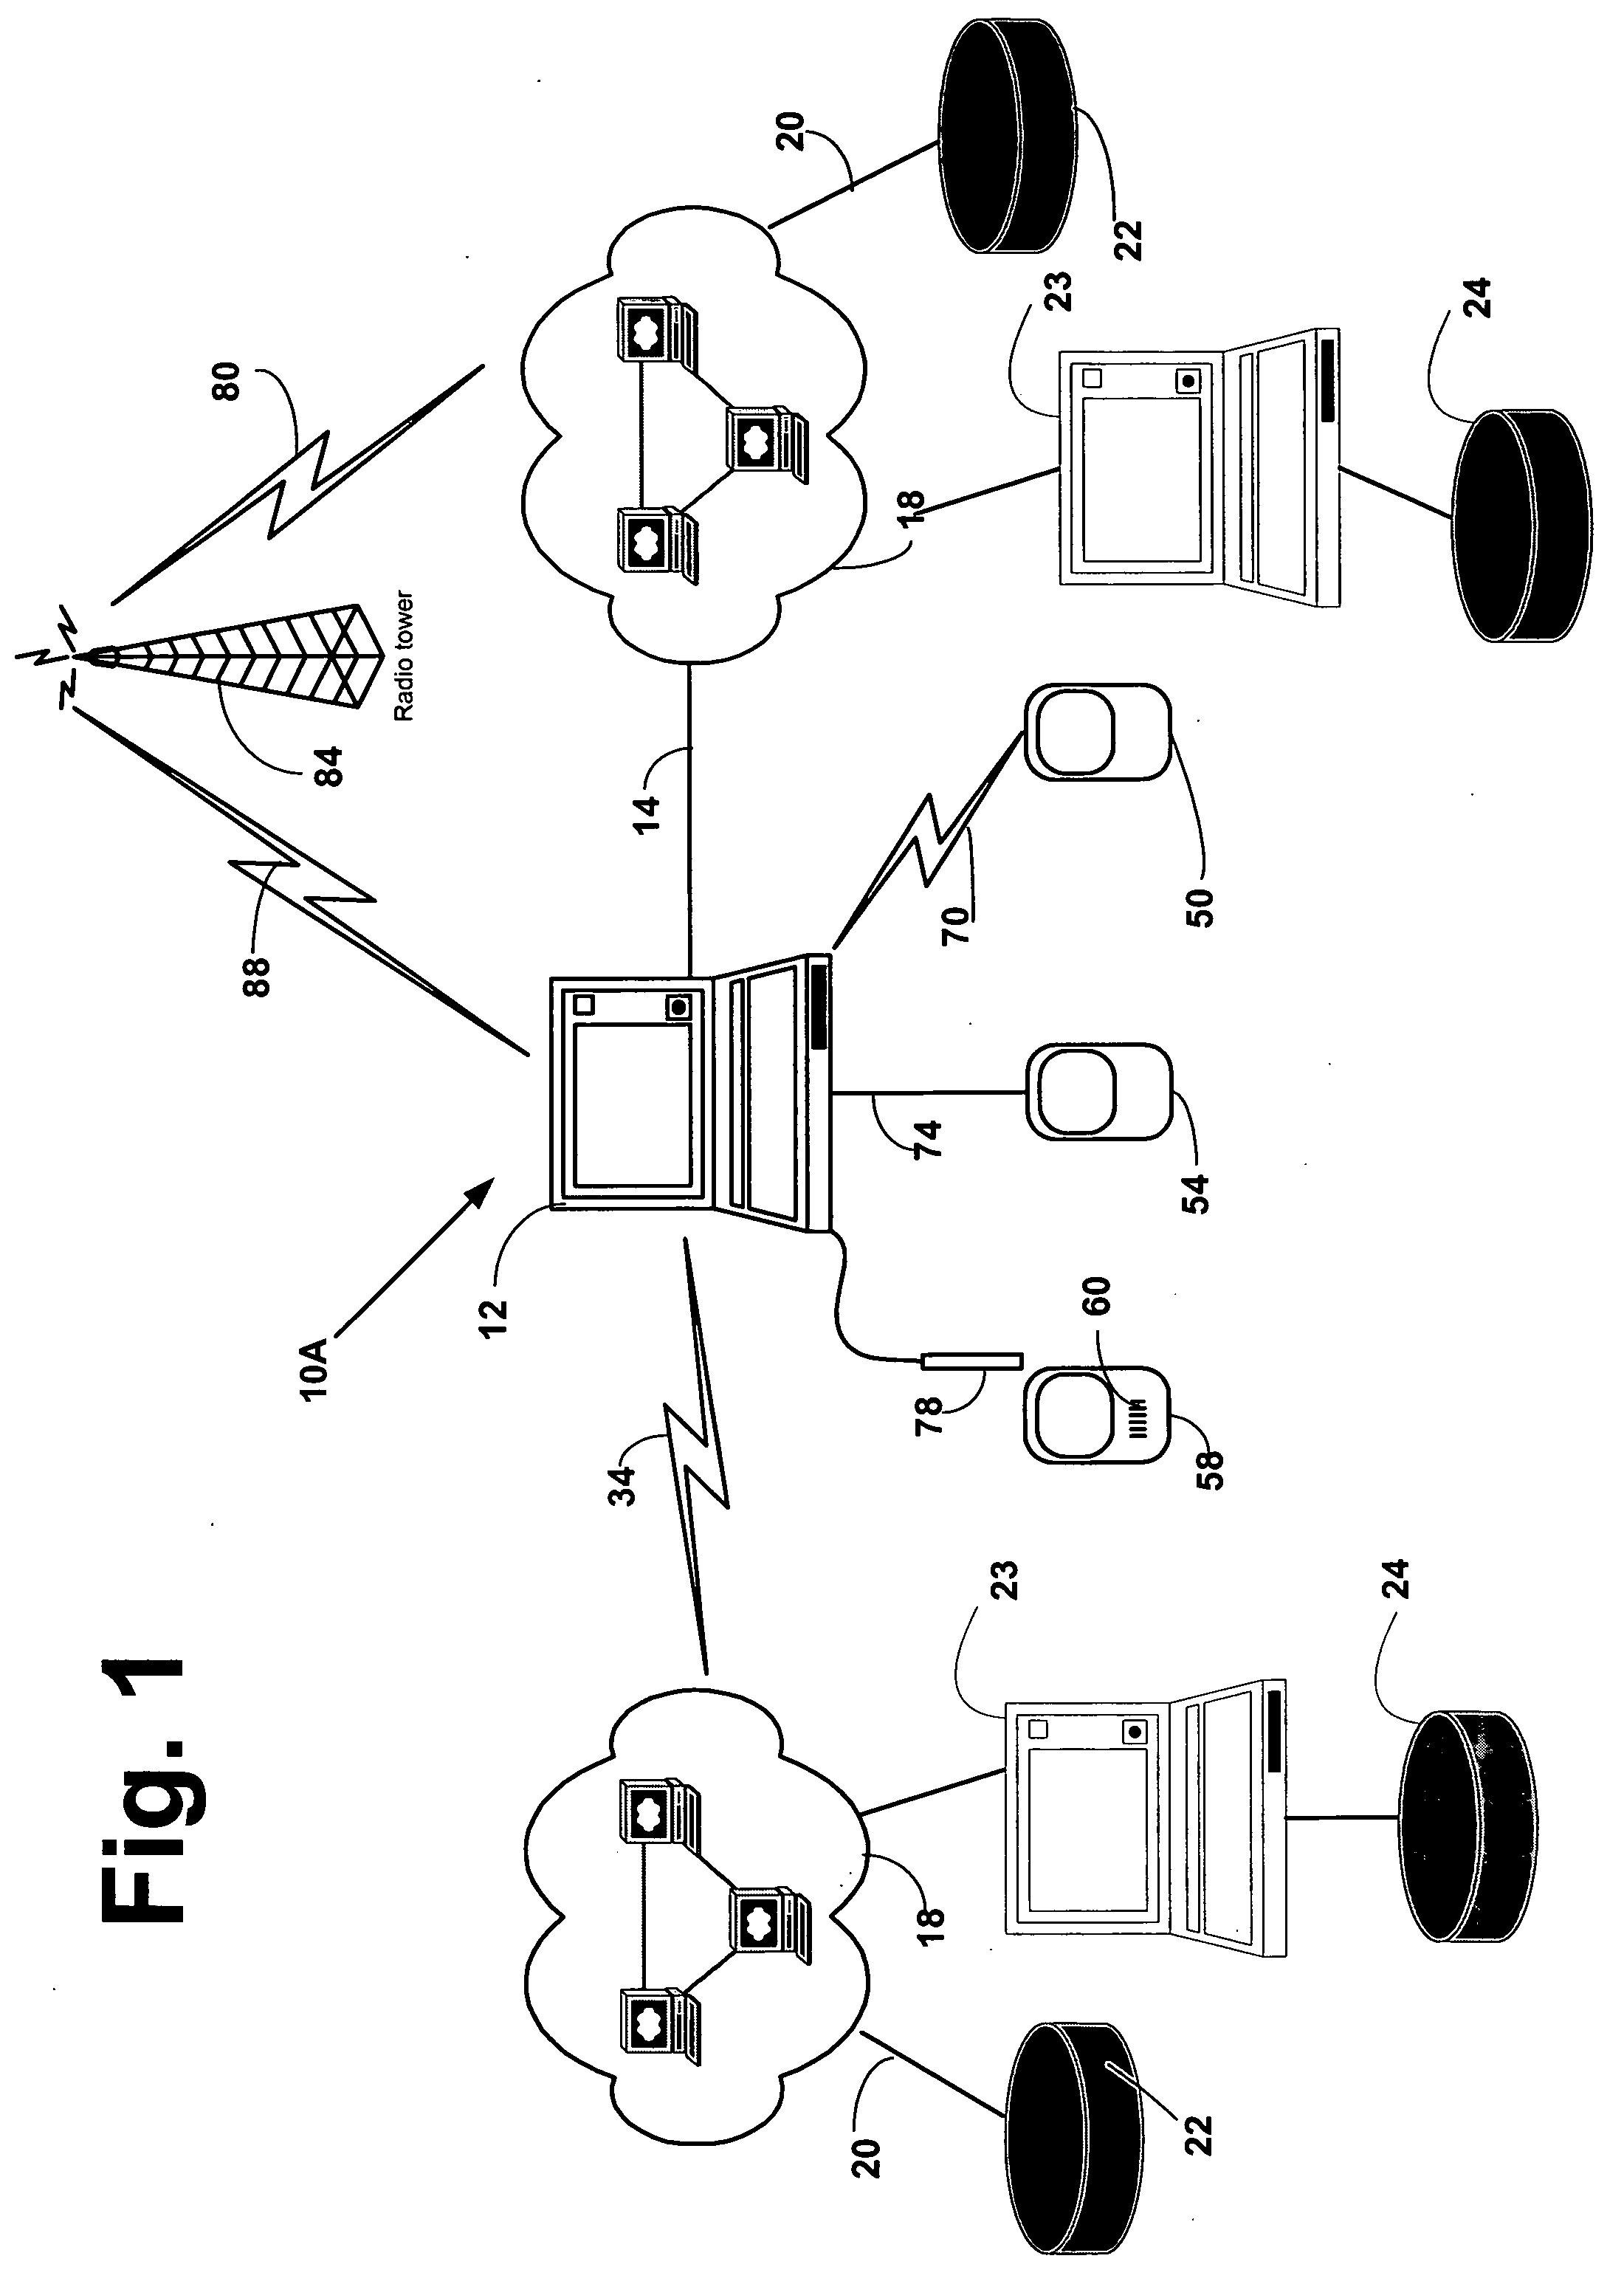 System and method for updating software in electronic devices